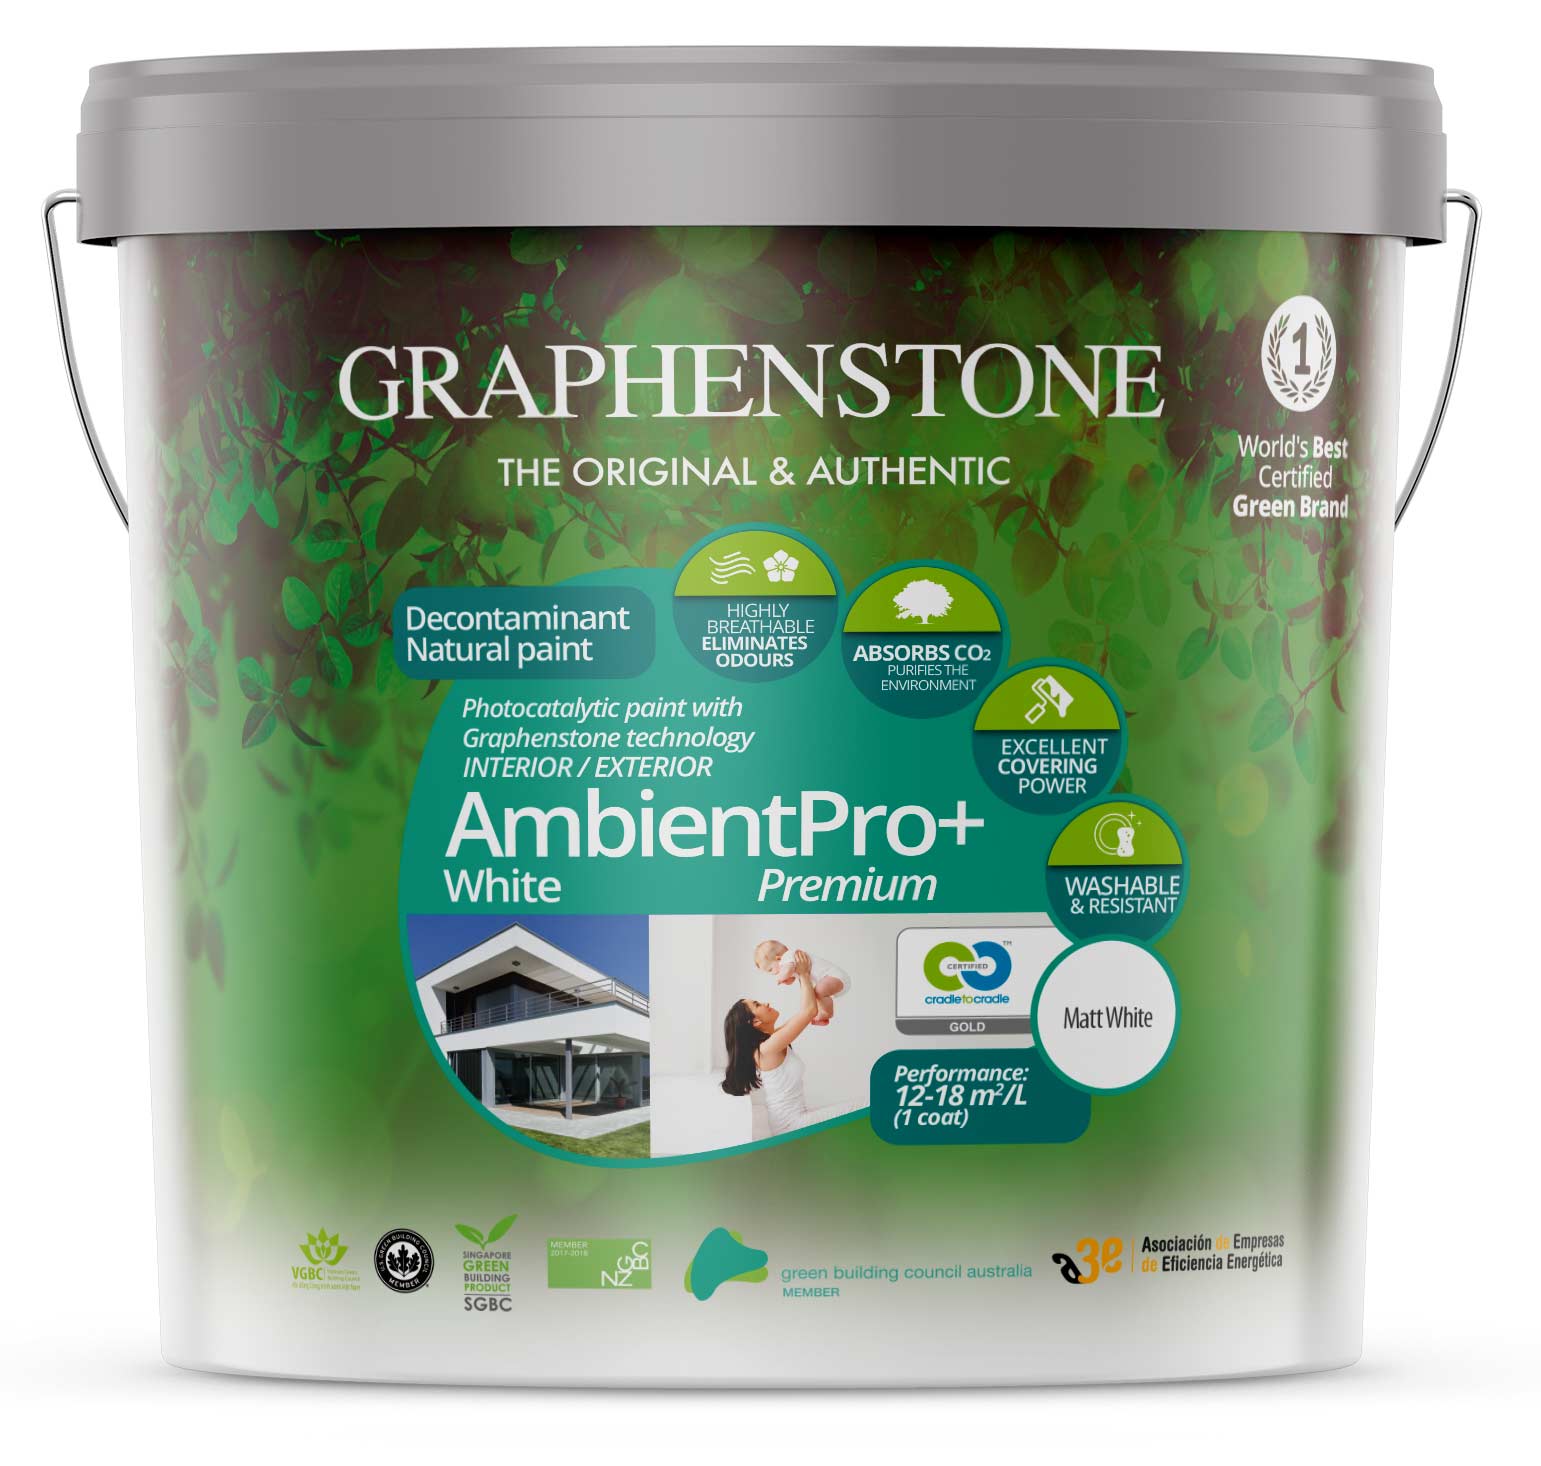 Air purifying Paint – Graphenstone Ambient Pro White Photocatalytic